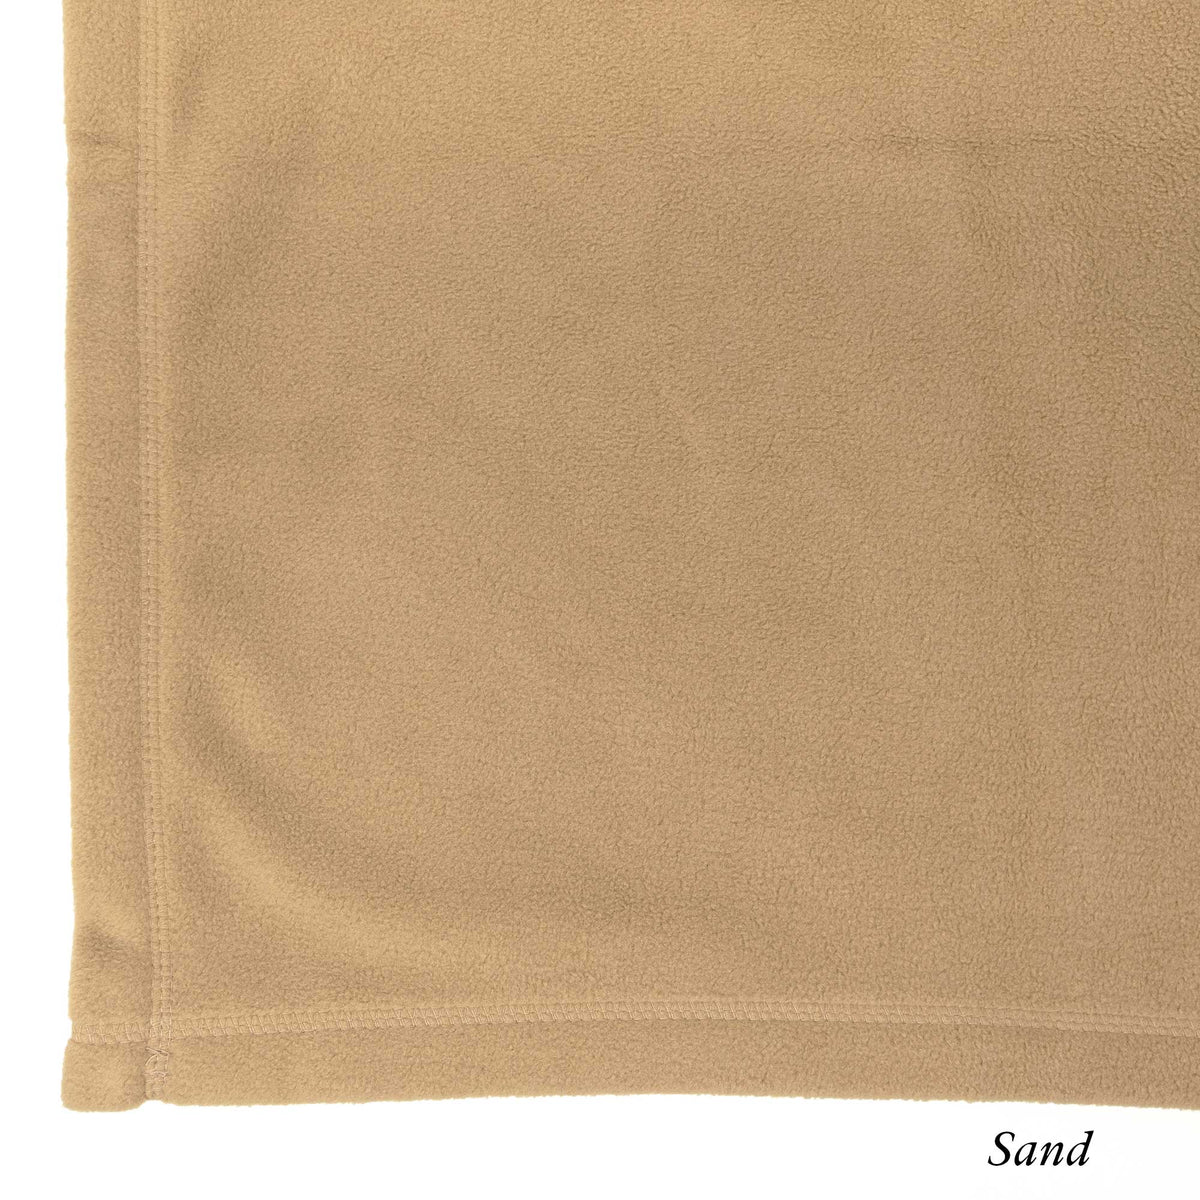 Sand - Biggest, Oversized, Fleece Blankets - Peaceful Touch